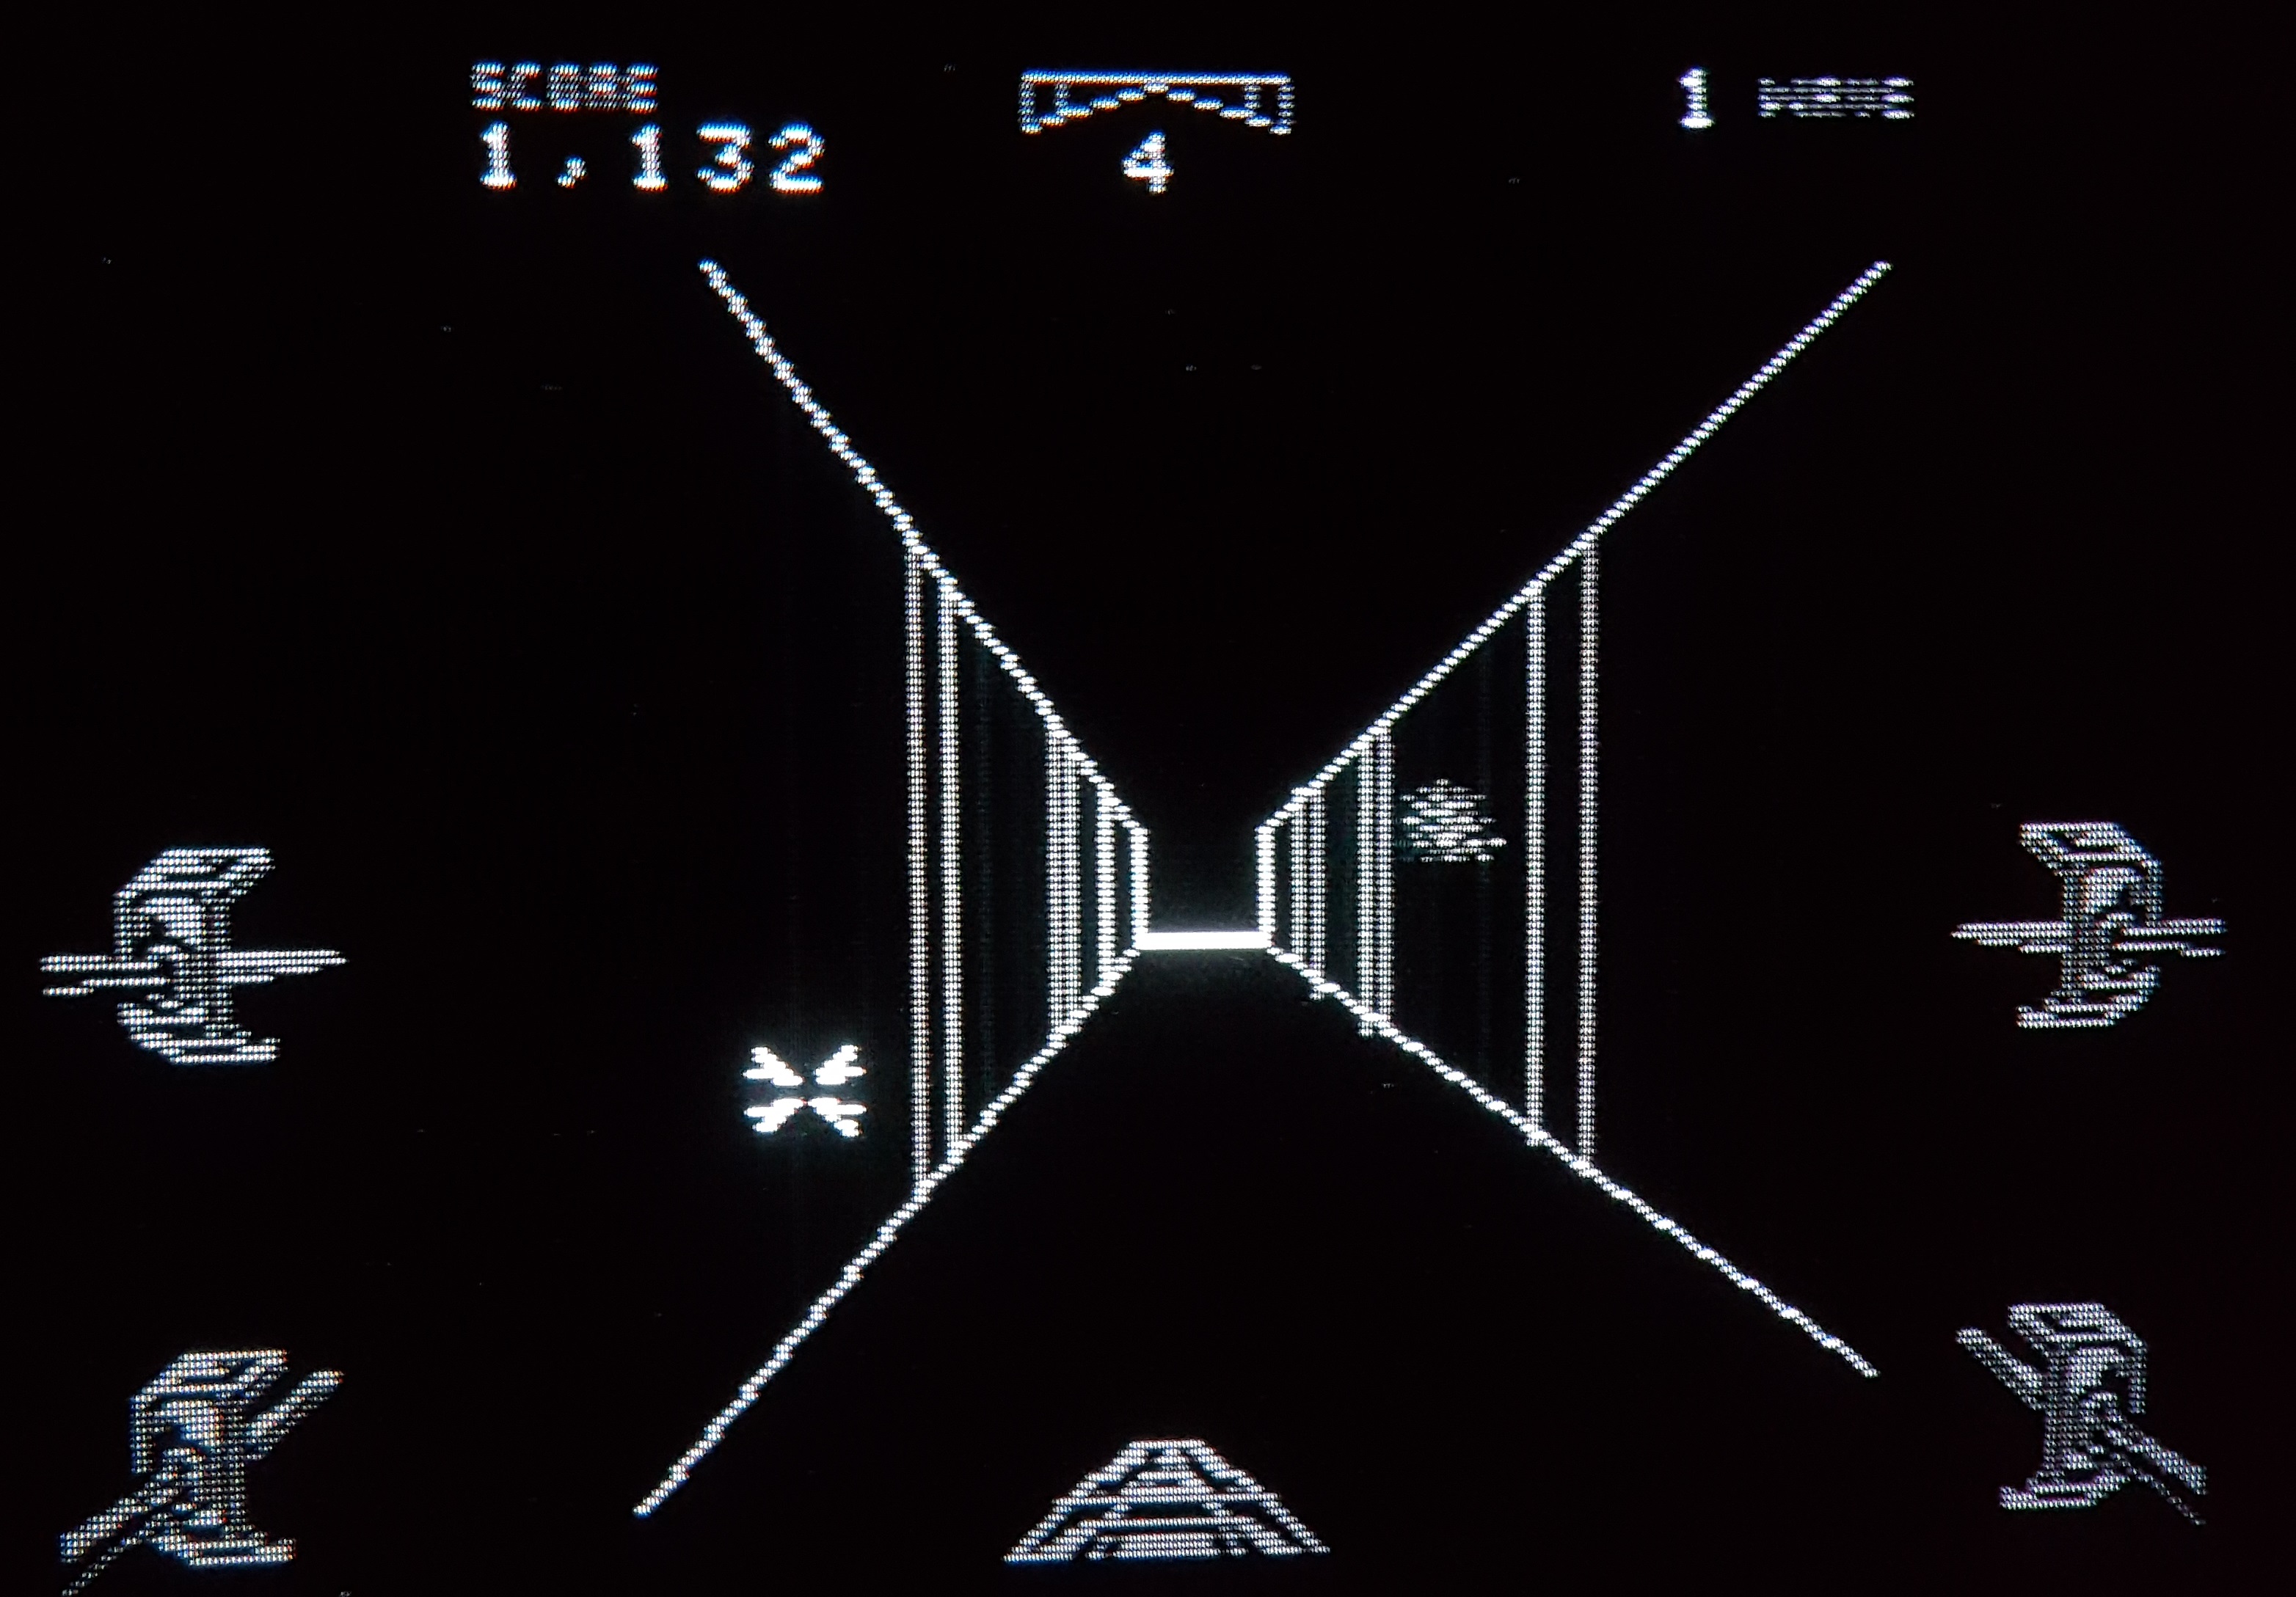 Star_Wars_Aracde-Colecovision-Trench